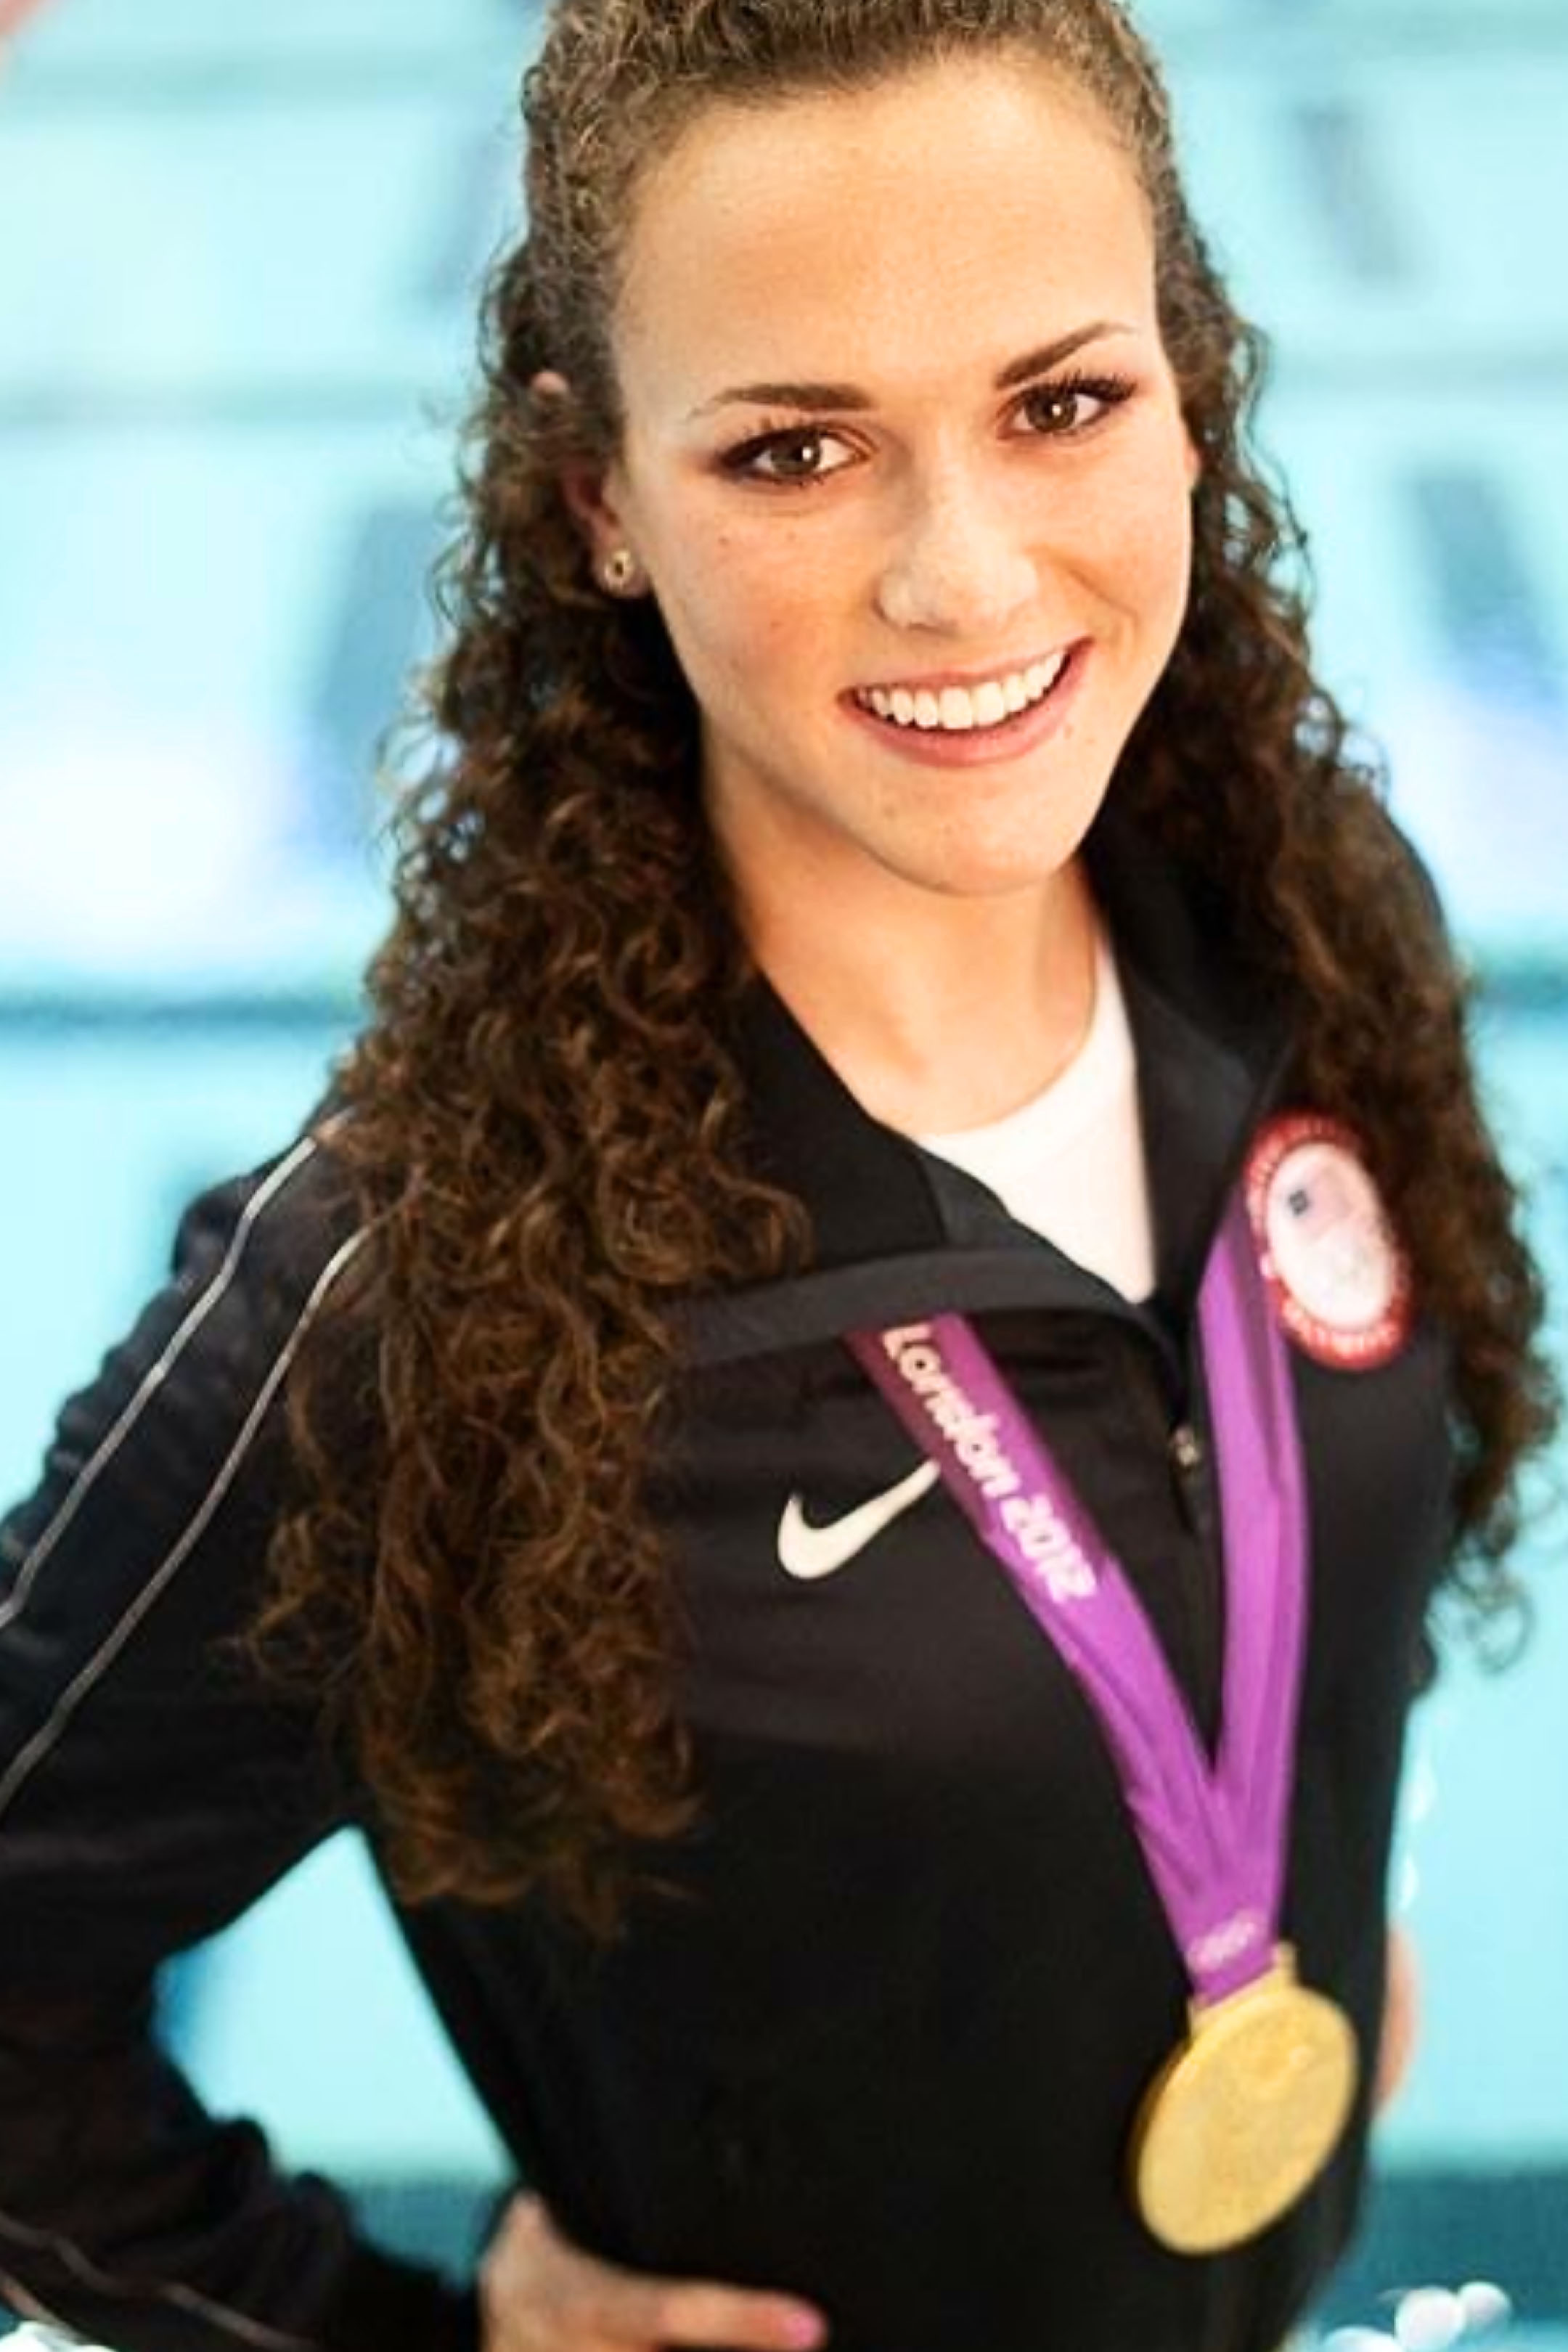 Lauren Perdue Headshot with London Olympic Medal